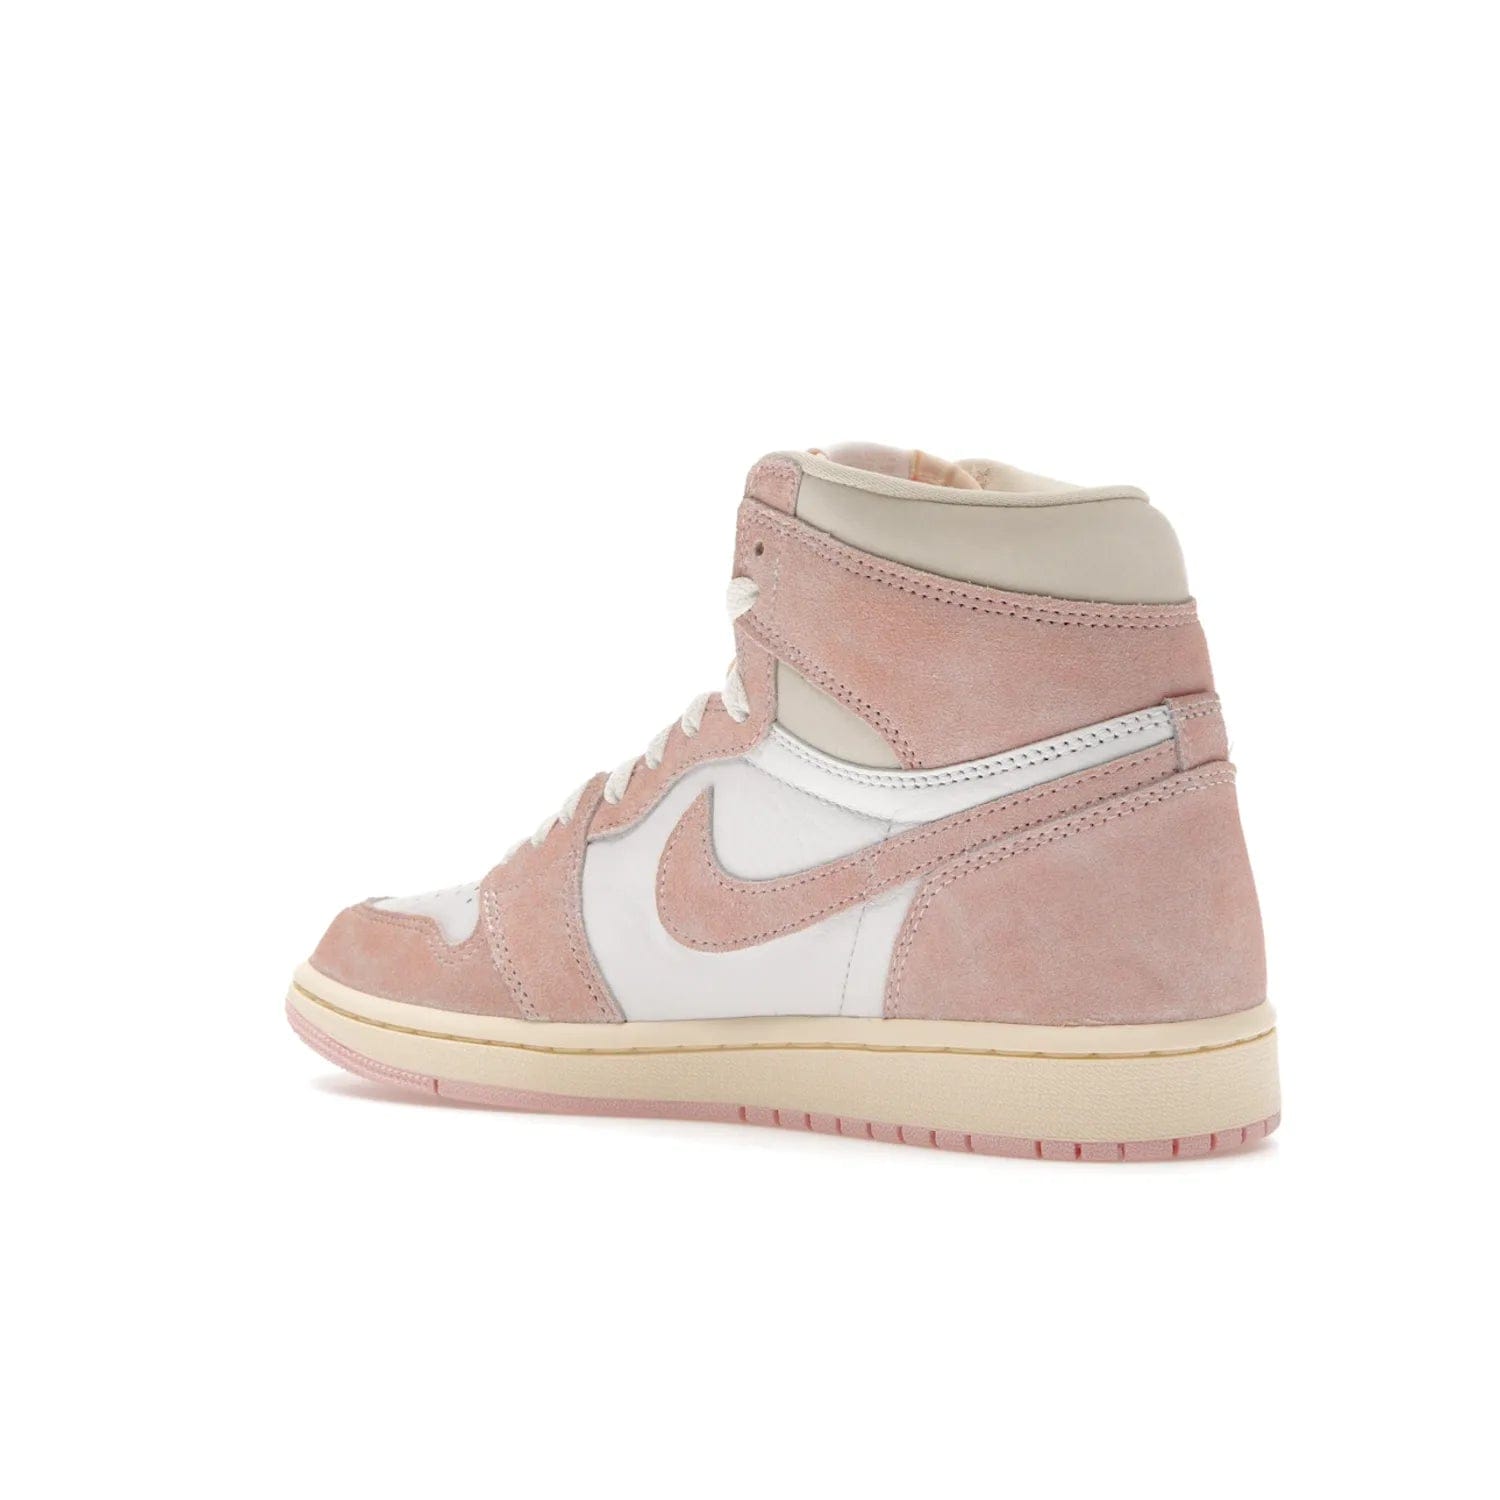 Jordan 1 Retro High OG Washed Pink (Women's) - Image 23 - Only at www.BallersClubKickz.com - Iconic Air Jordan 1 Retro High OG for women with unique pink suede and white leather uppers. Get the timeless look on April 22, 2023.